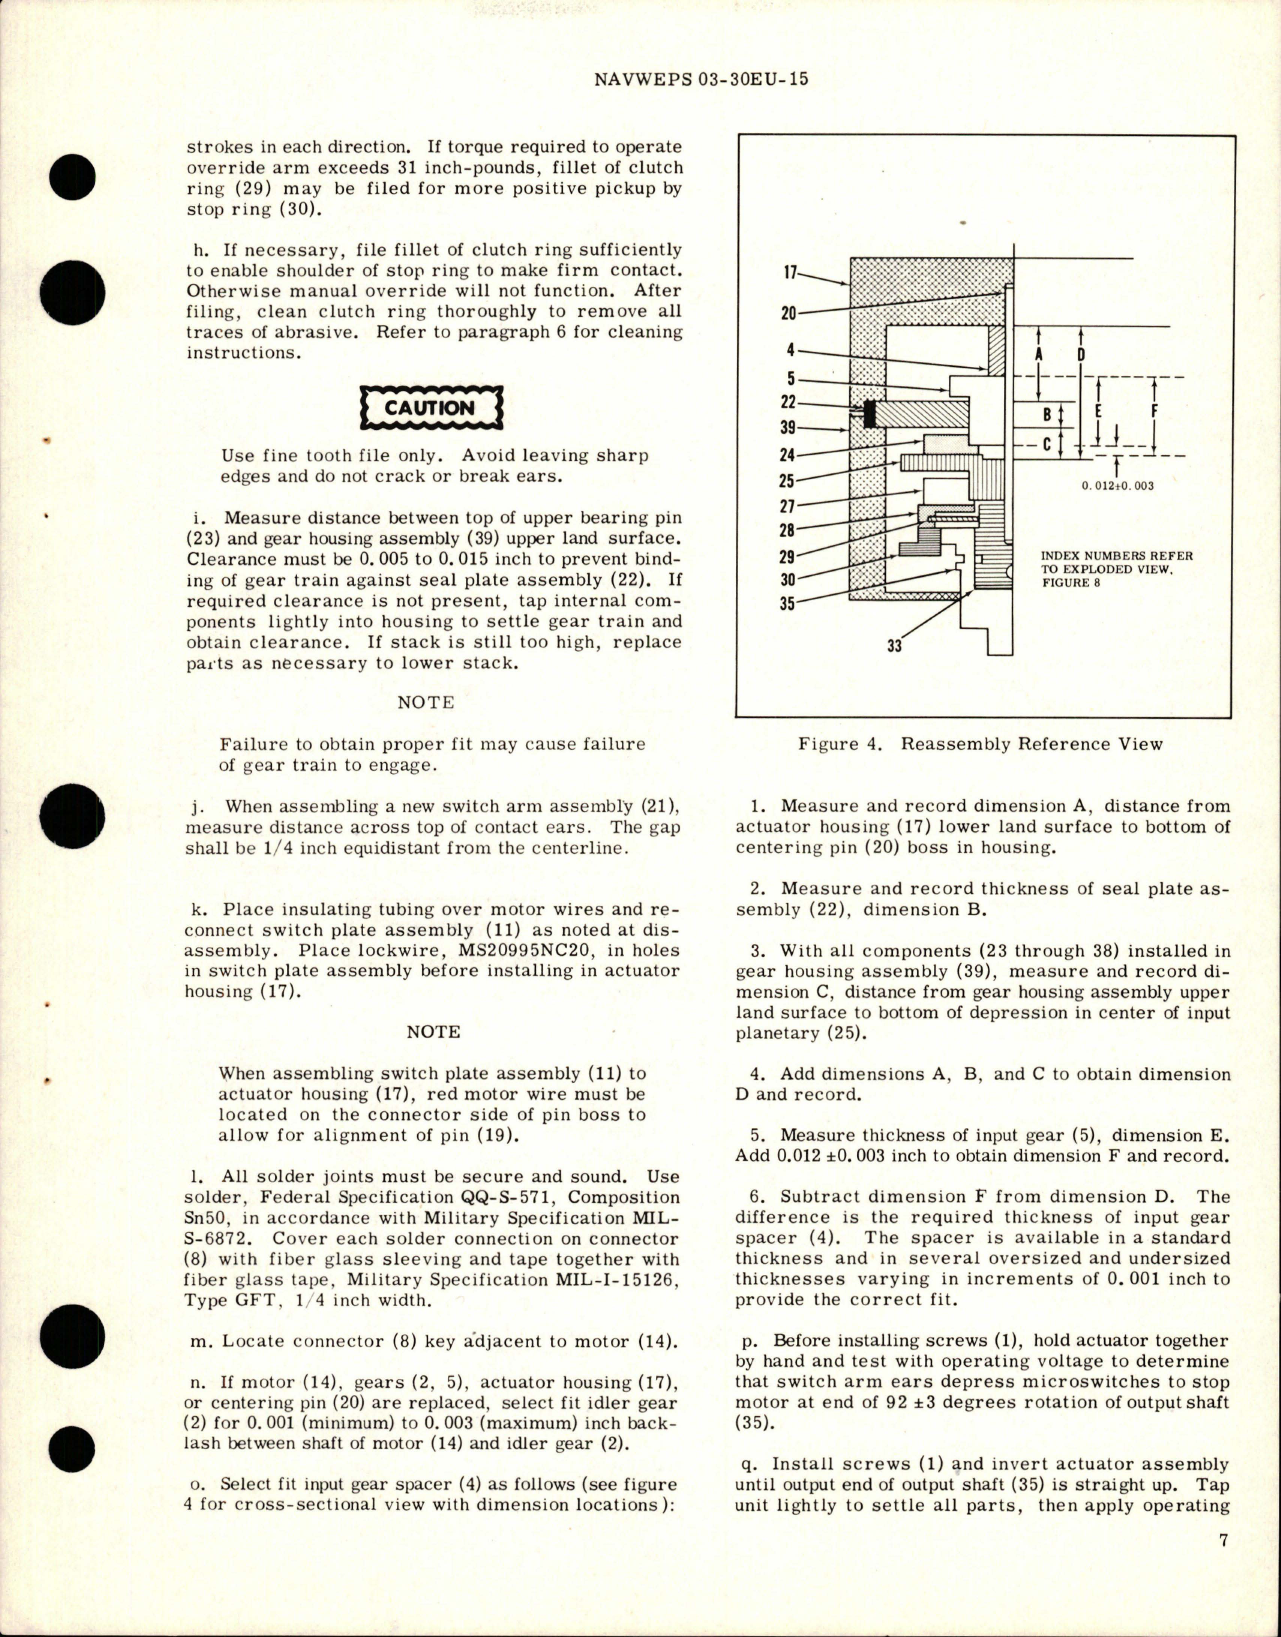 Sample page 9 from AirCorps Library document: Overhaul Instructions with Parts Breakdown for Manual Override Pull Out Type - Motor Operated Gate Valve